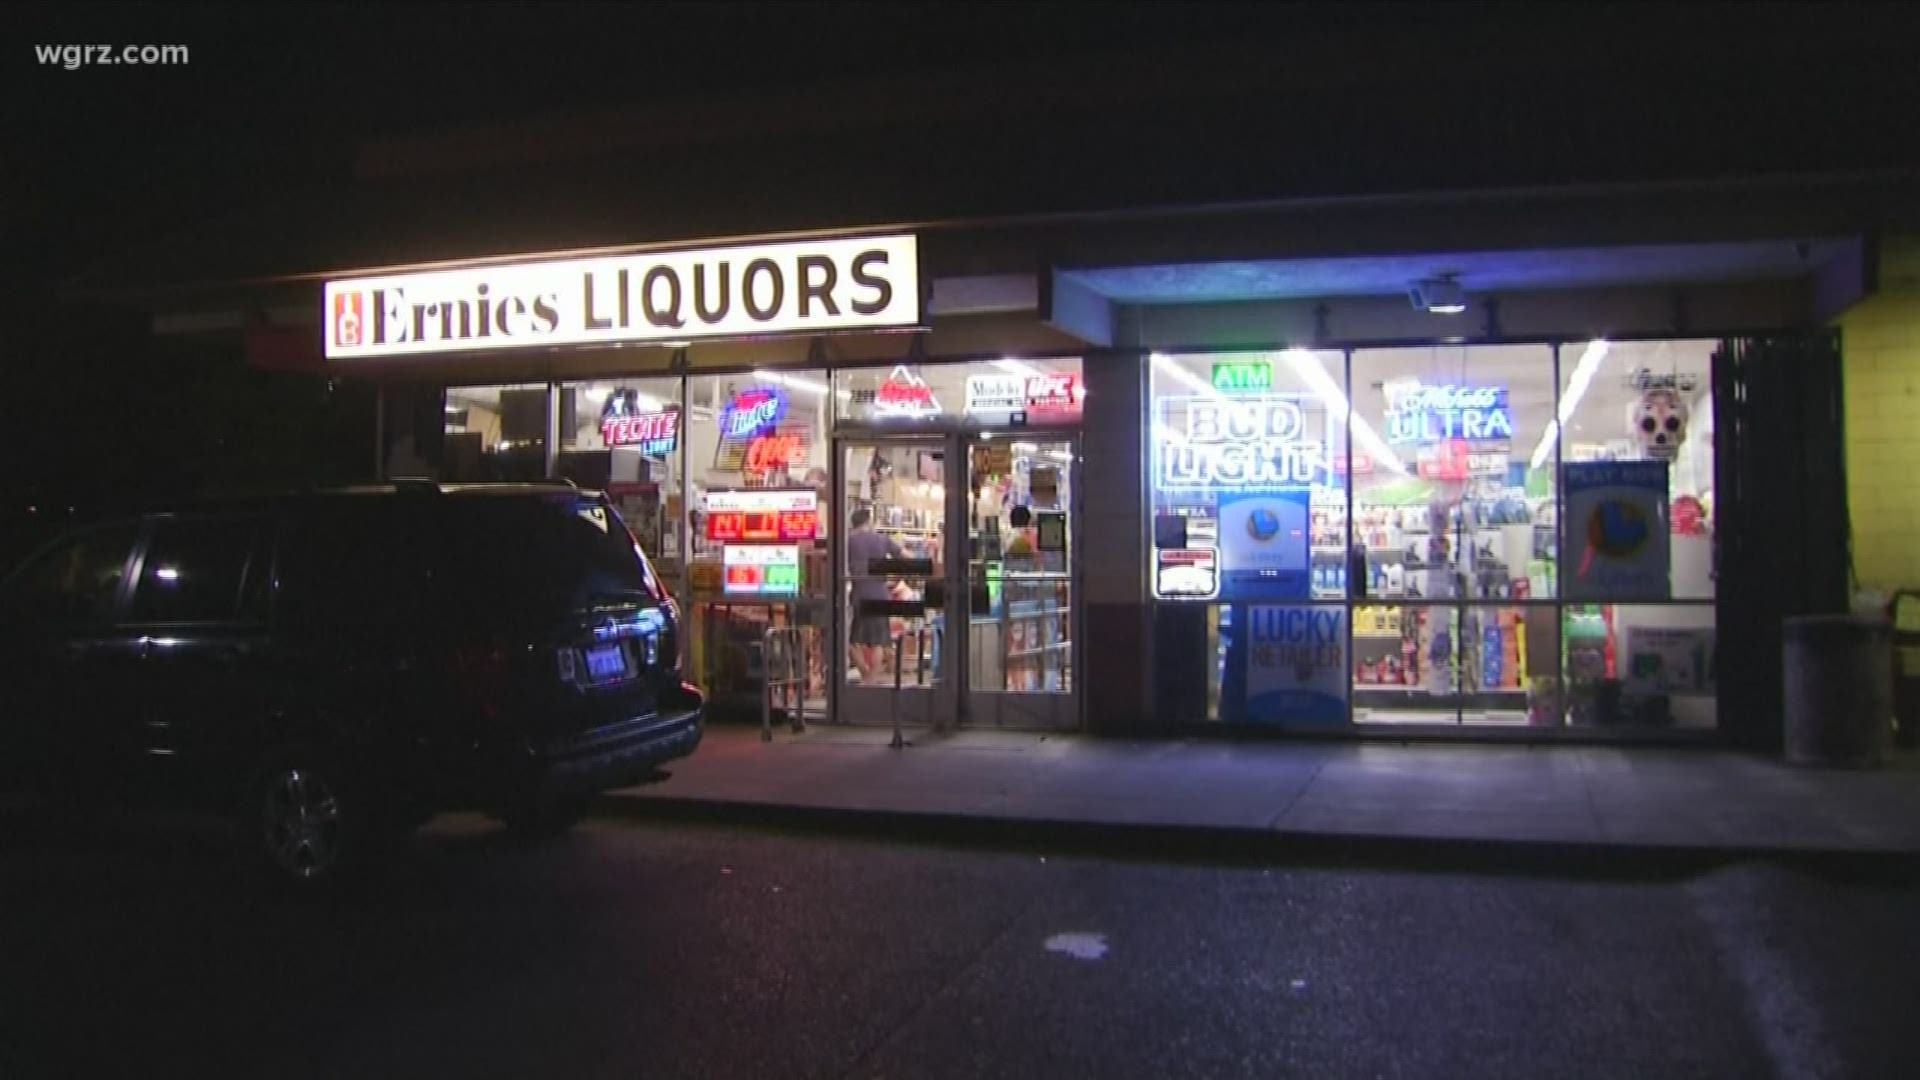 The New York Lottery announced yesterday morning that a $3-million Mega Millions ticket was sold here in Buffalo.